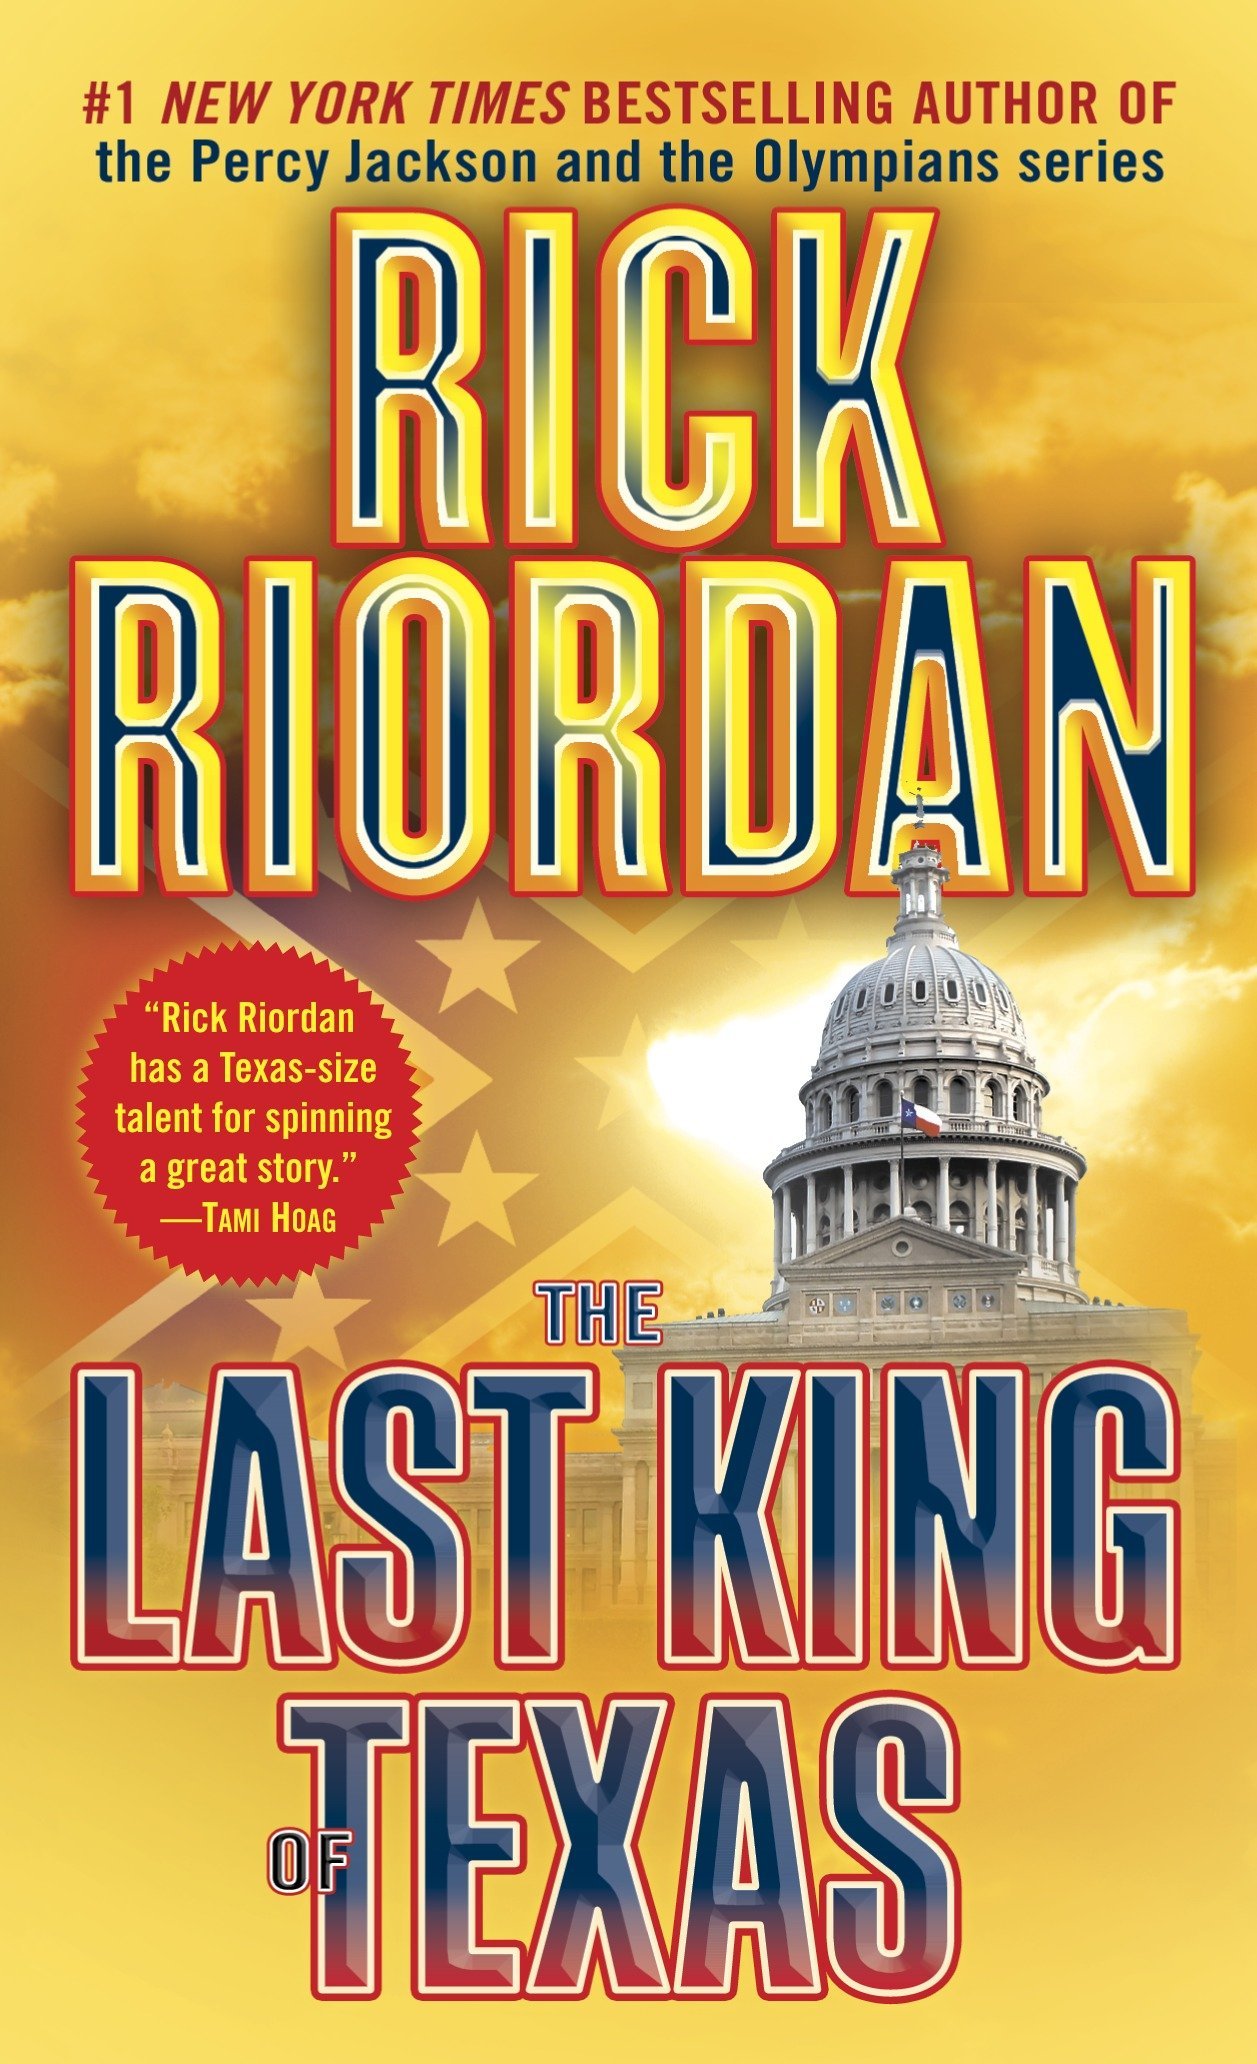 Cover of the Last King of Texas